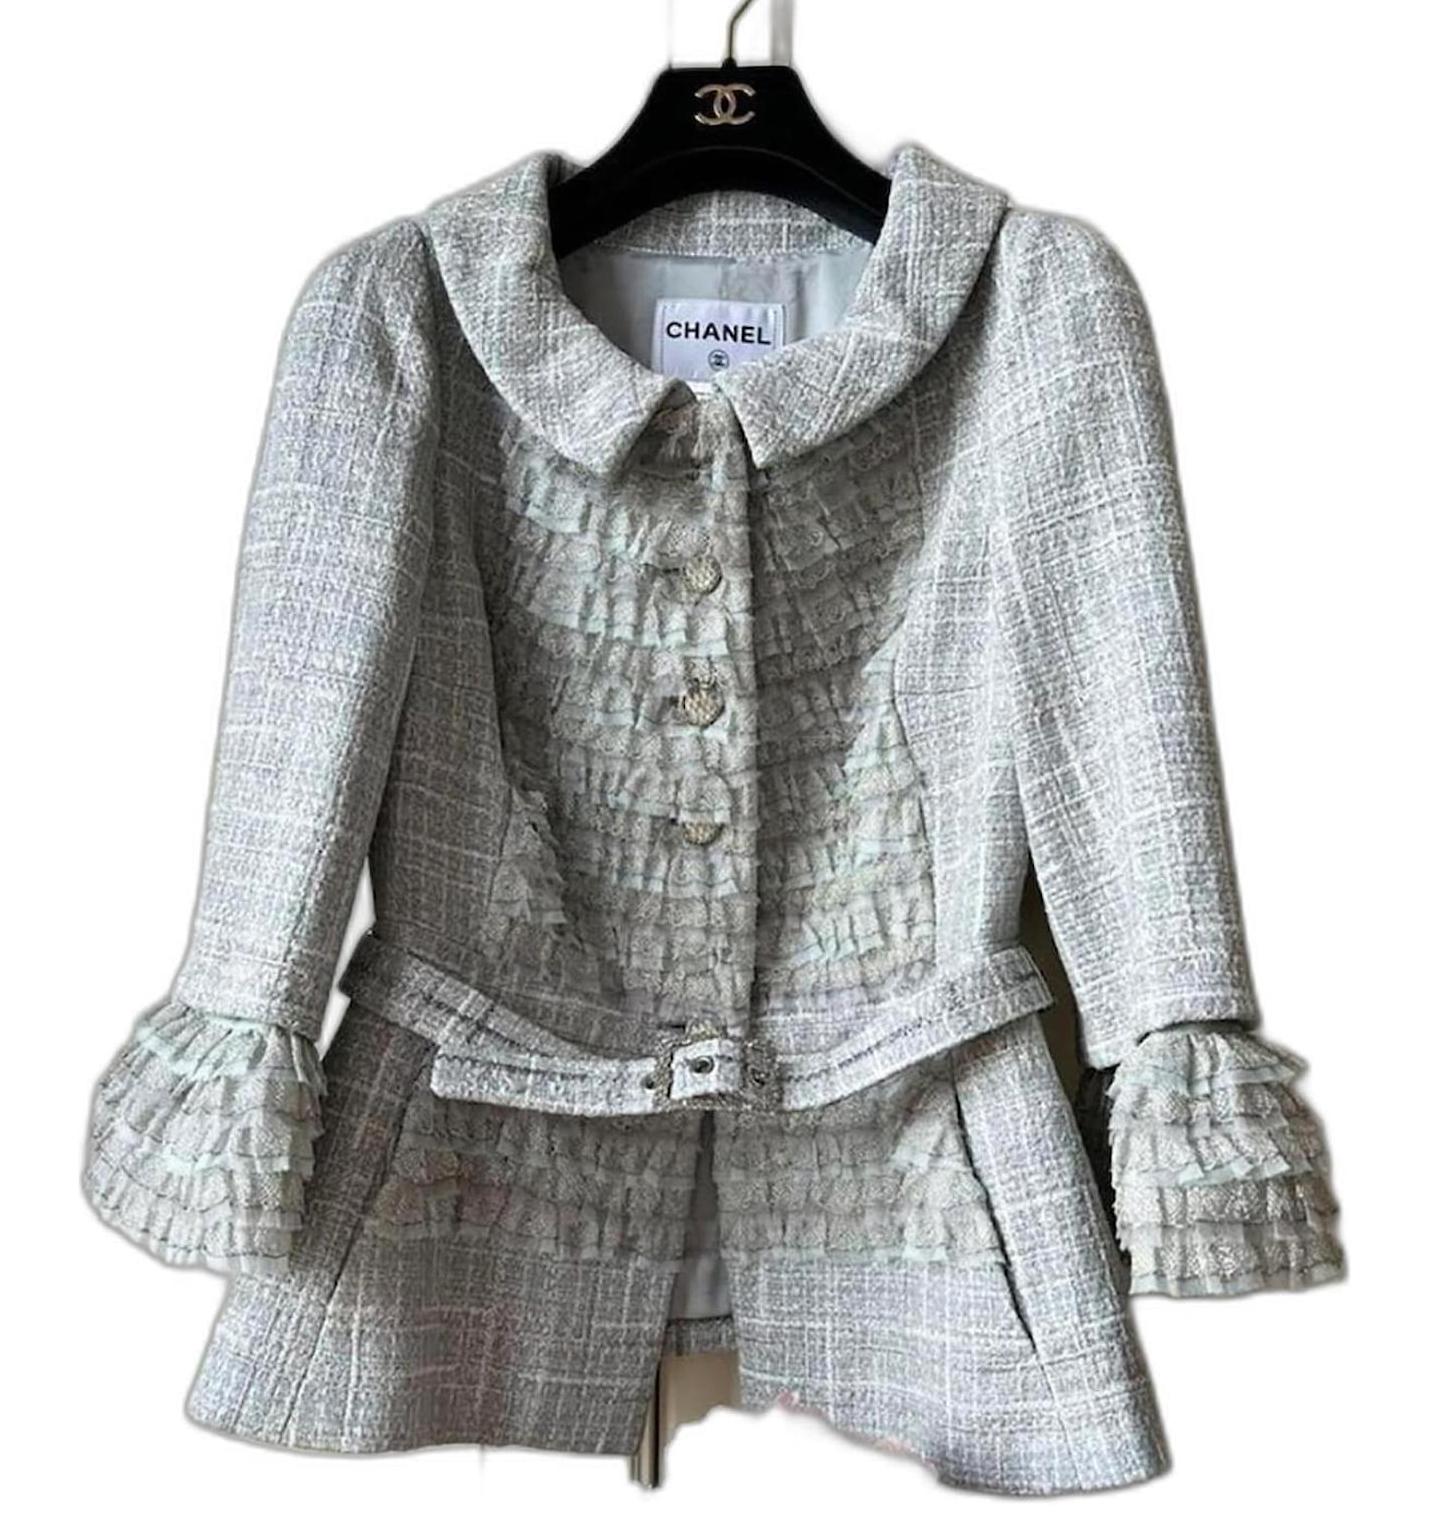 Famous Chanel lesage tweed jacket - icon of 2013 Cruise Paris / Versailles Collection, 13C 
Retail price ca. 13,000$, price at ebay over 8,000$
- stunning jewel CC buttons 
- ruffles detailing 
- full silk lining 
Size mark 42 fr. Only tried once.